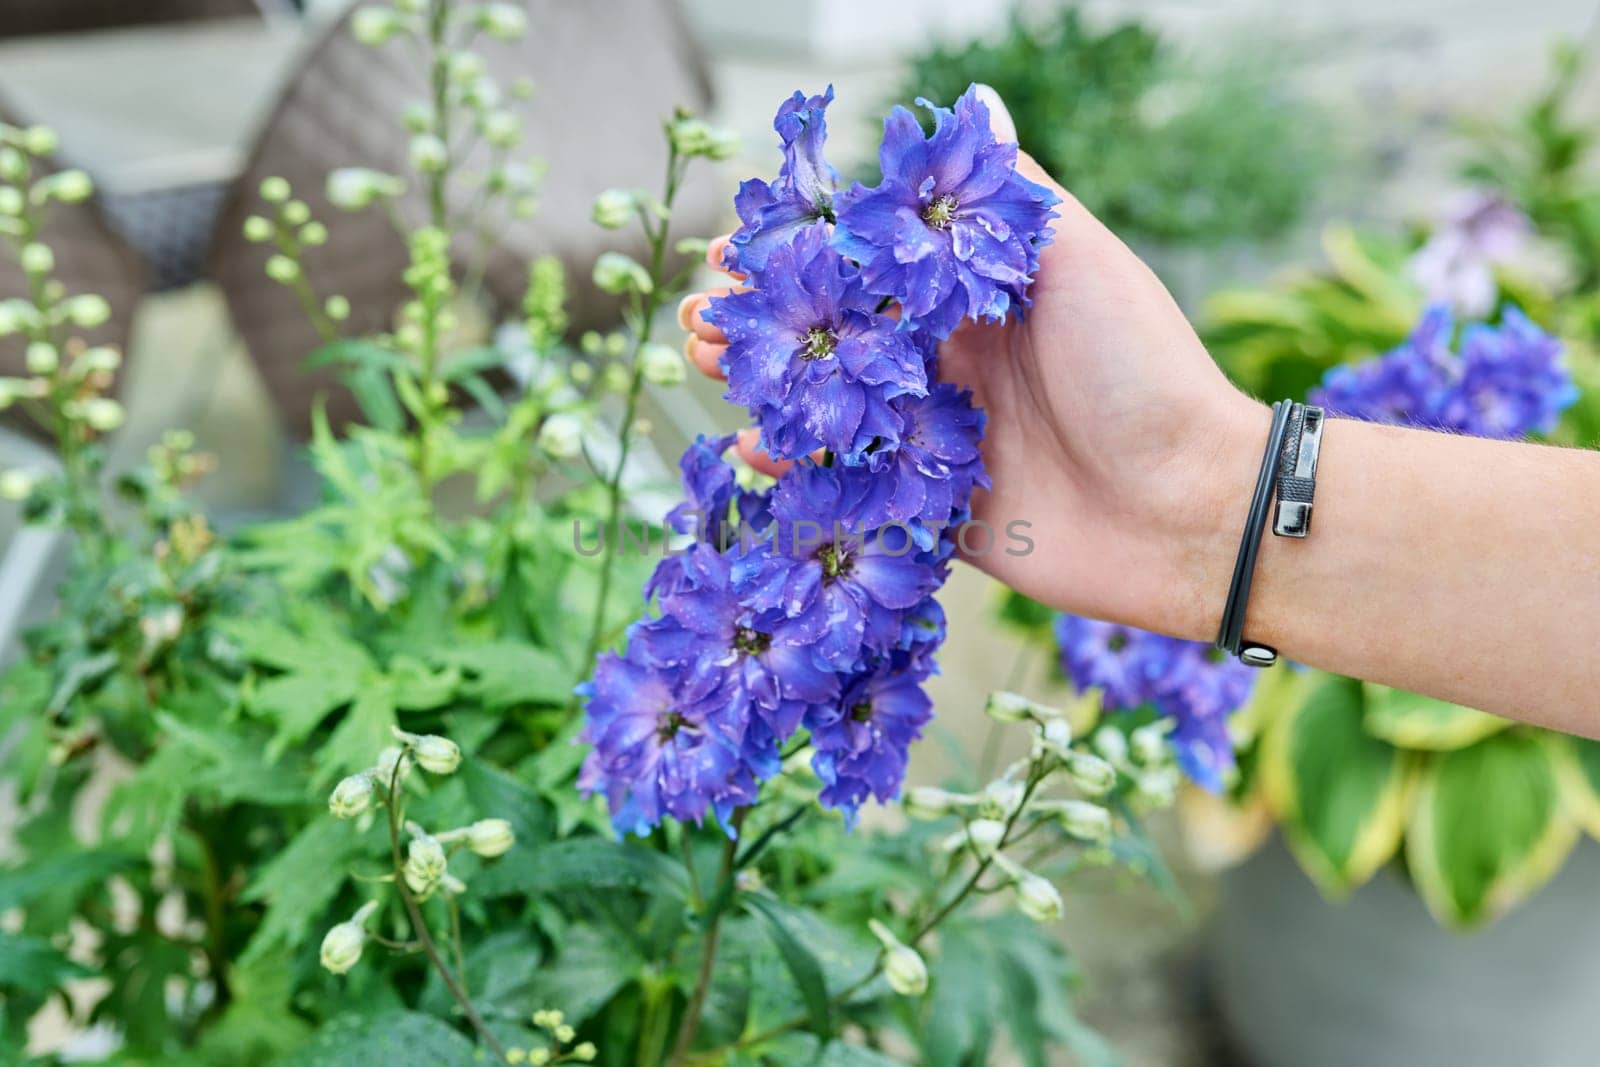 Larkspur plant high delphinium, blooming blue plant, hand touching flowers by VH-studio